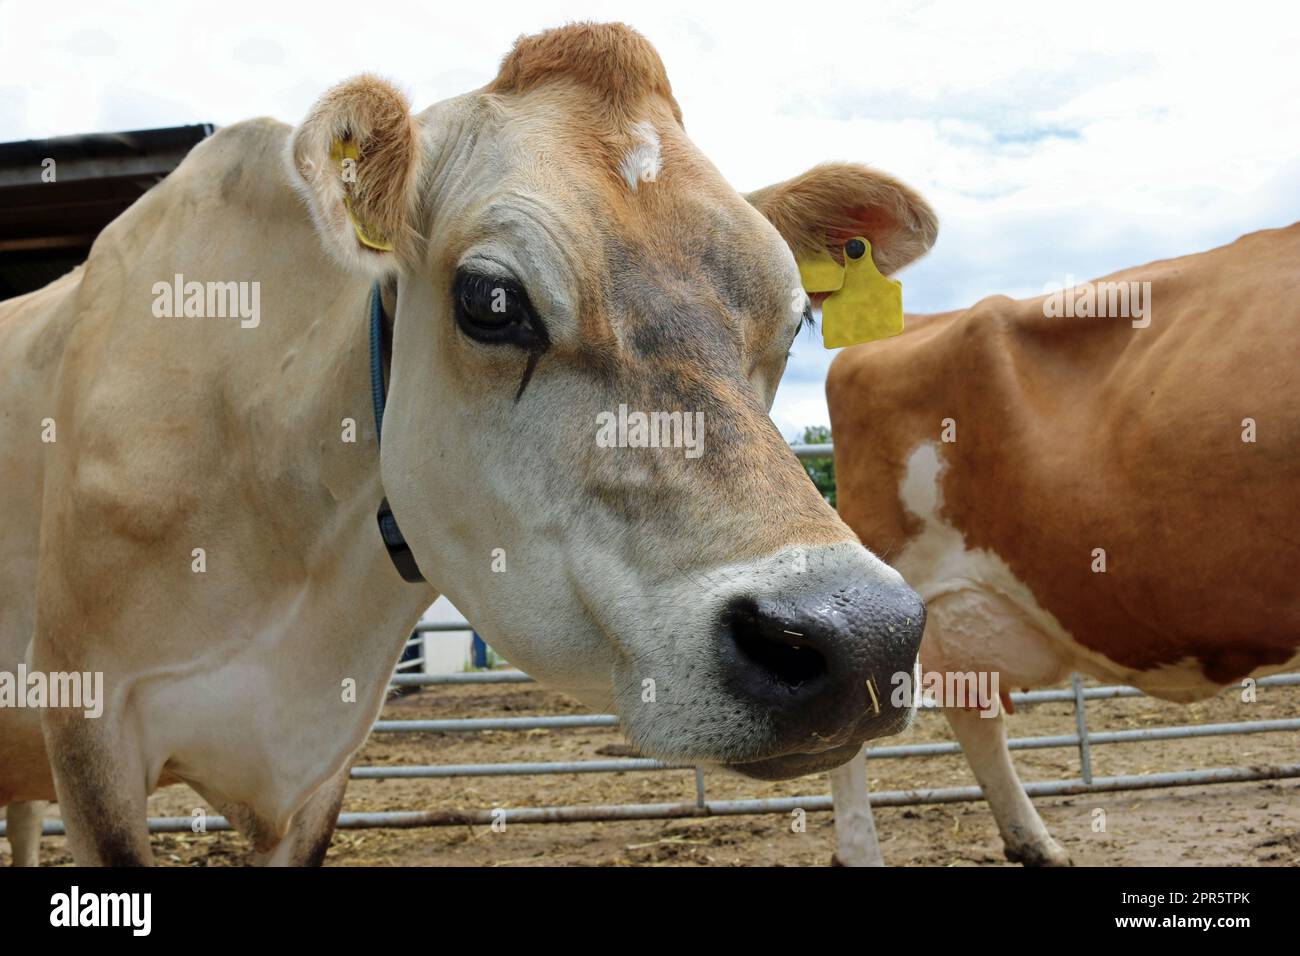 Guernsey cow head and shoulders Stock Photo